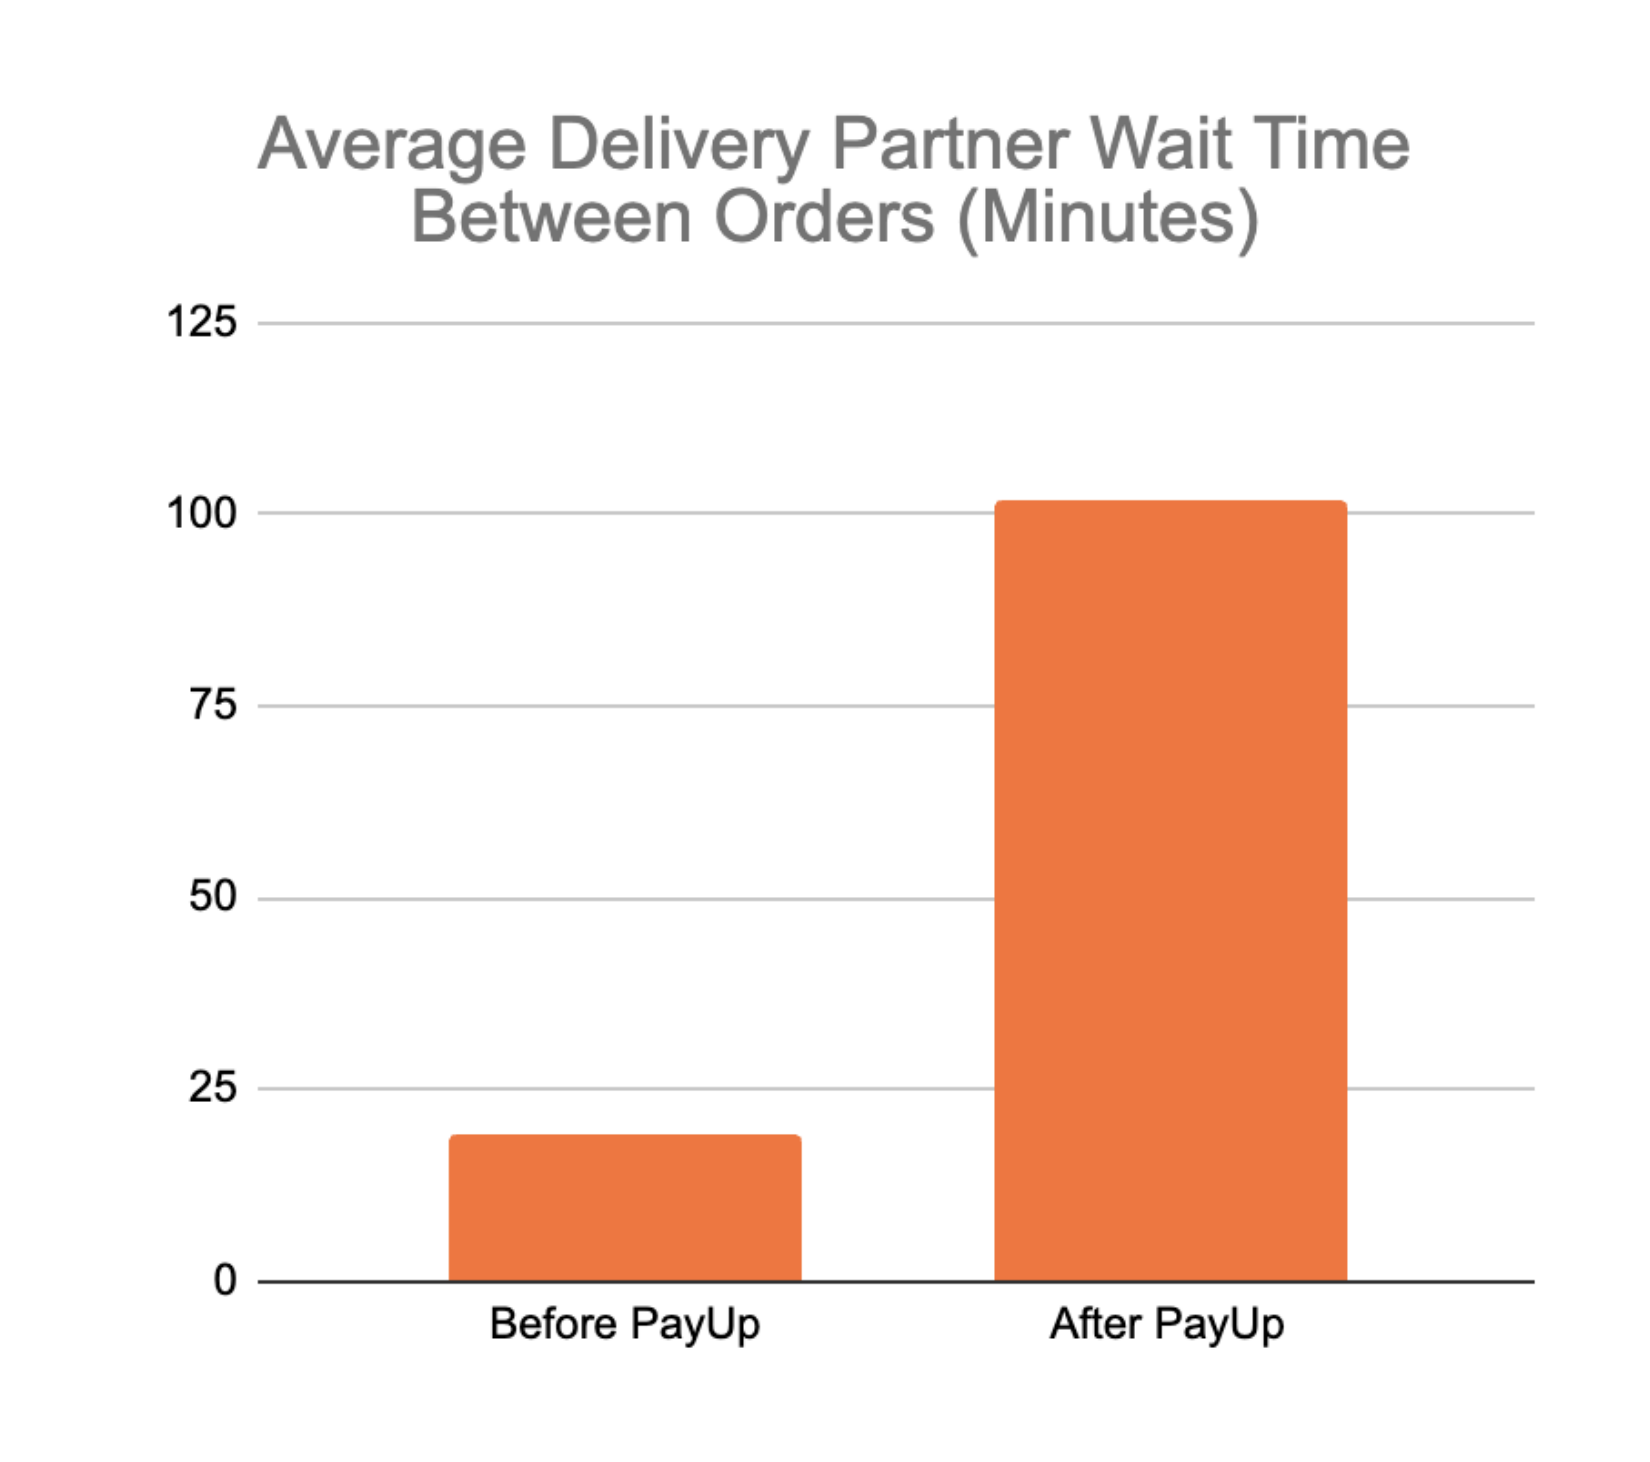 Chart showing the difference in courier wait times between orders pre- and post-implementation of Seattle's "PayUp" wage ordinance. Two columns, one labeled "Before PayUp" showing wait times under 20 minutes, and a second column labeled "After PayUp" showing wait times over 100 minutes. 